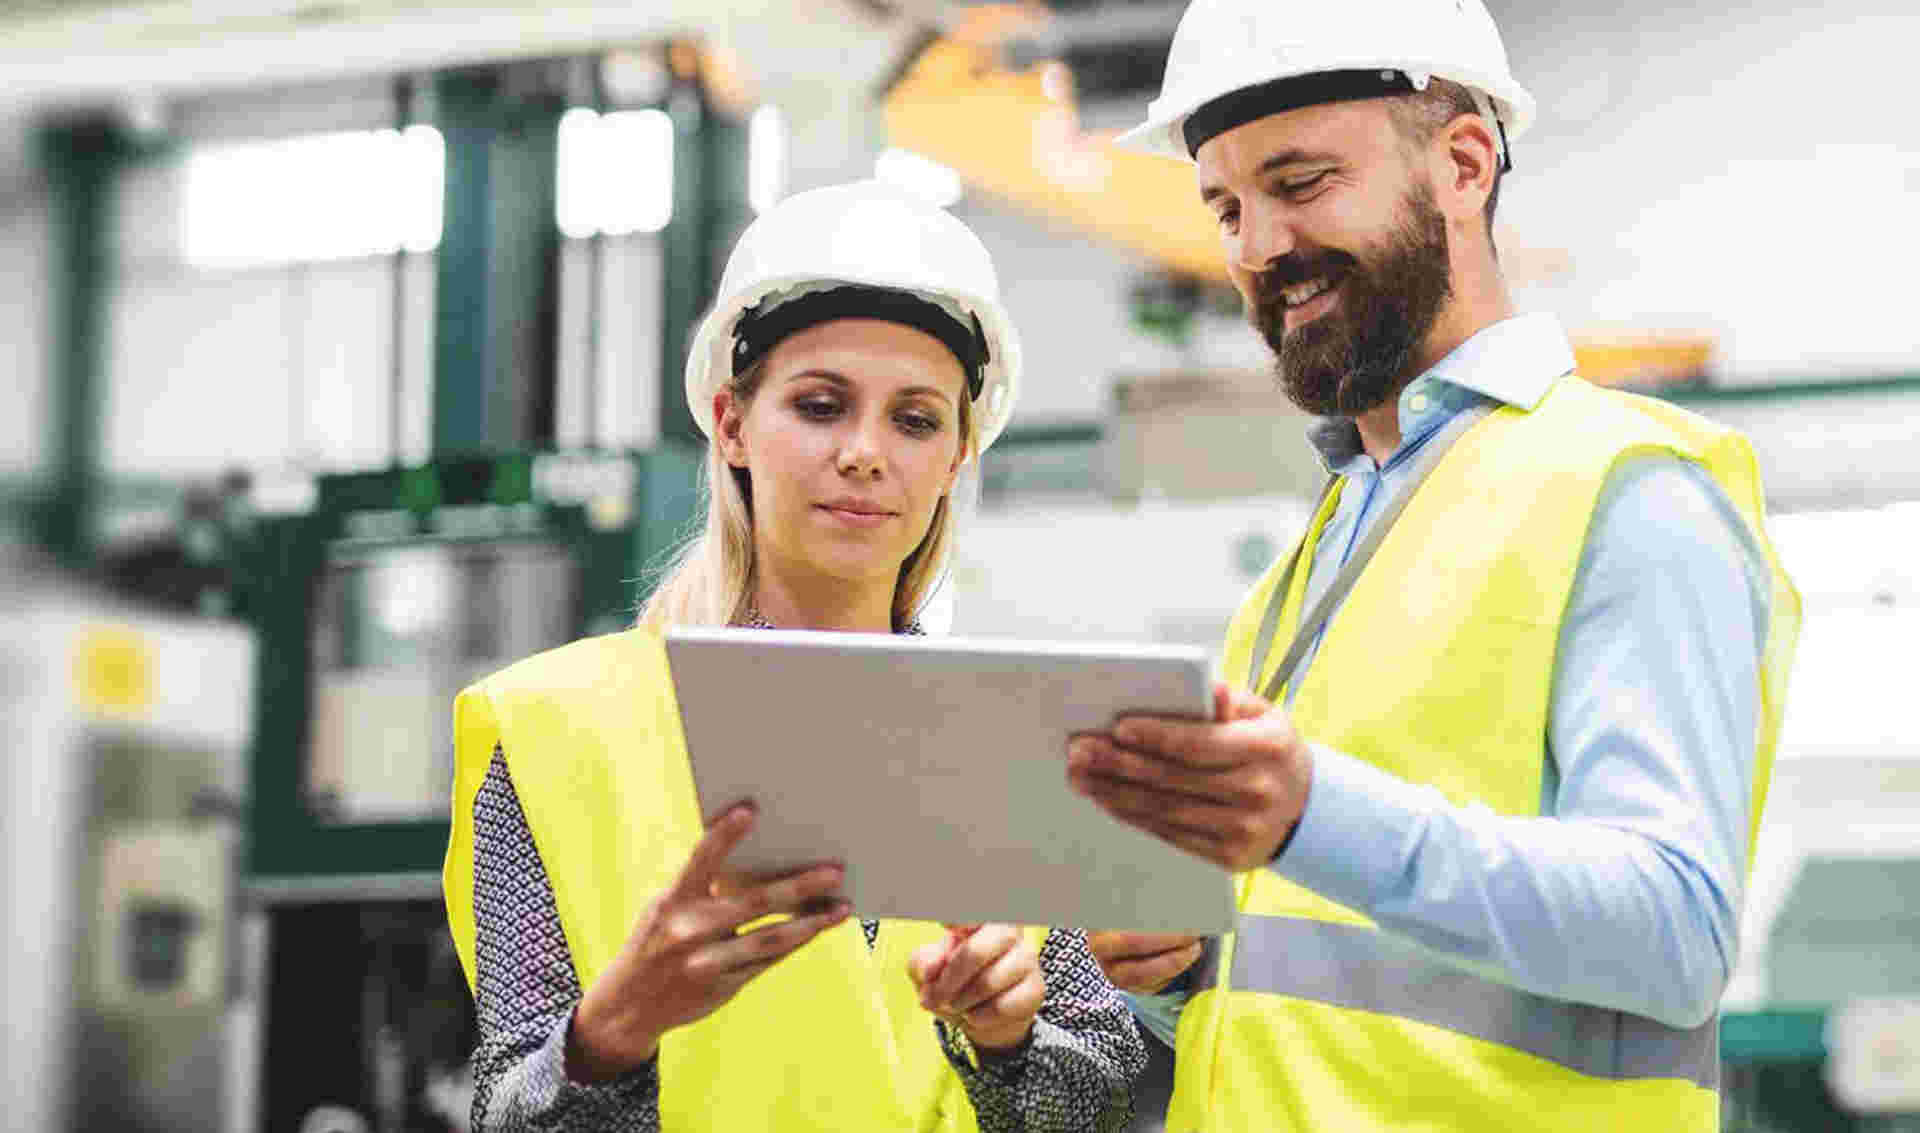 Digital Solutions for the Digital Native Generation  – the need for a sustainable skills pipeline as the skills shortage in professional trades grows